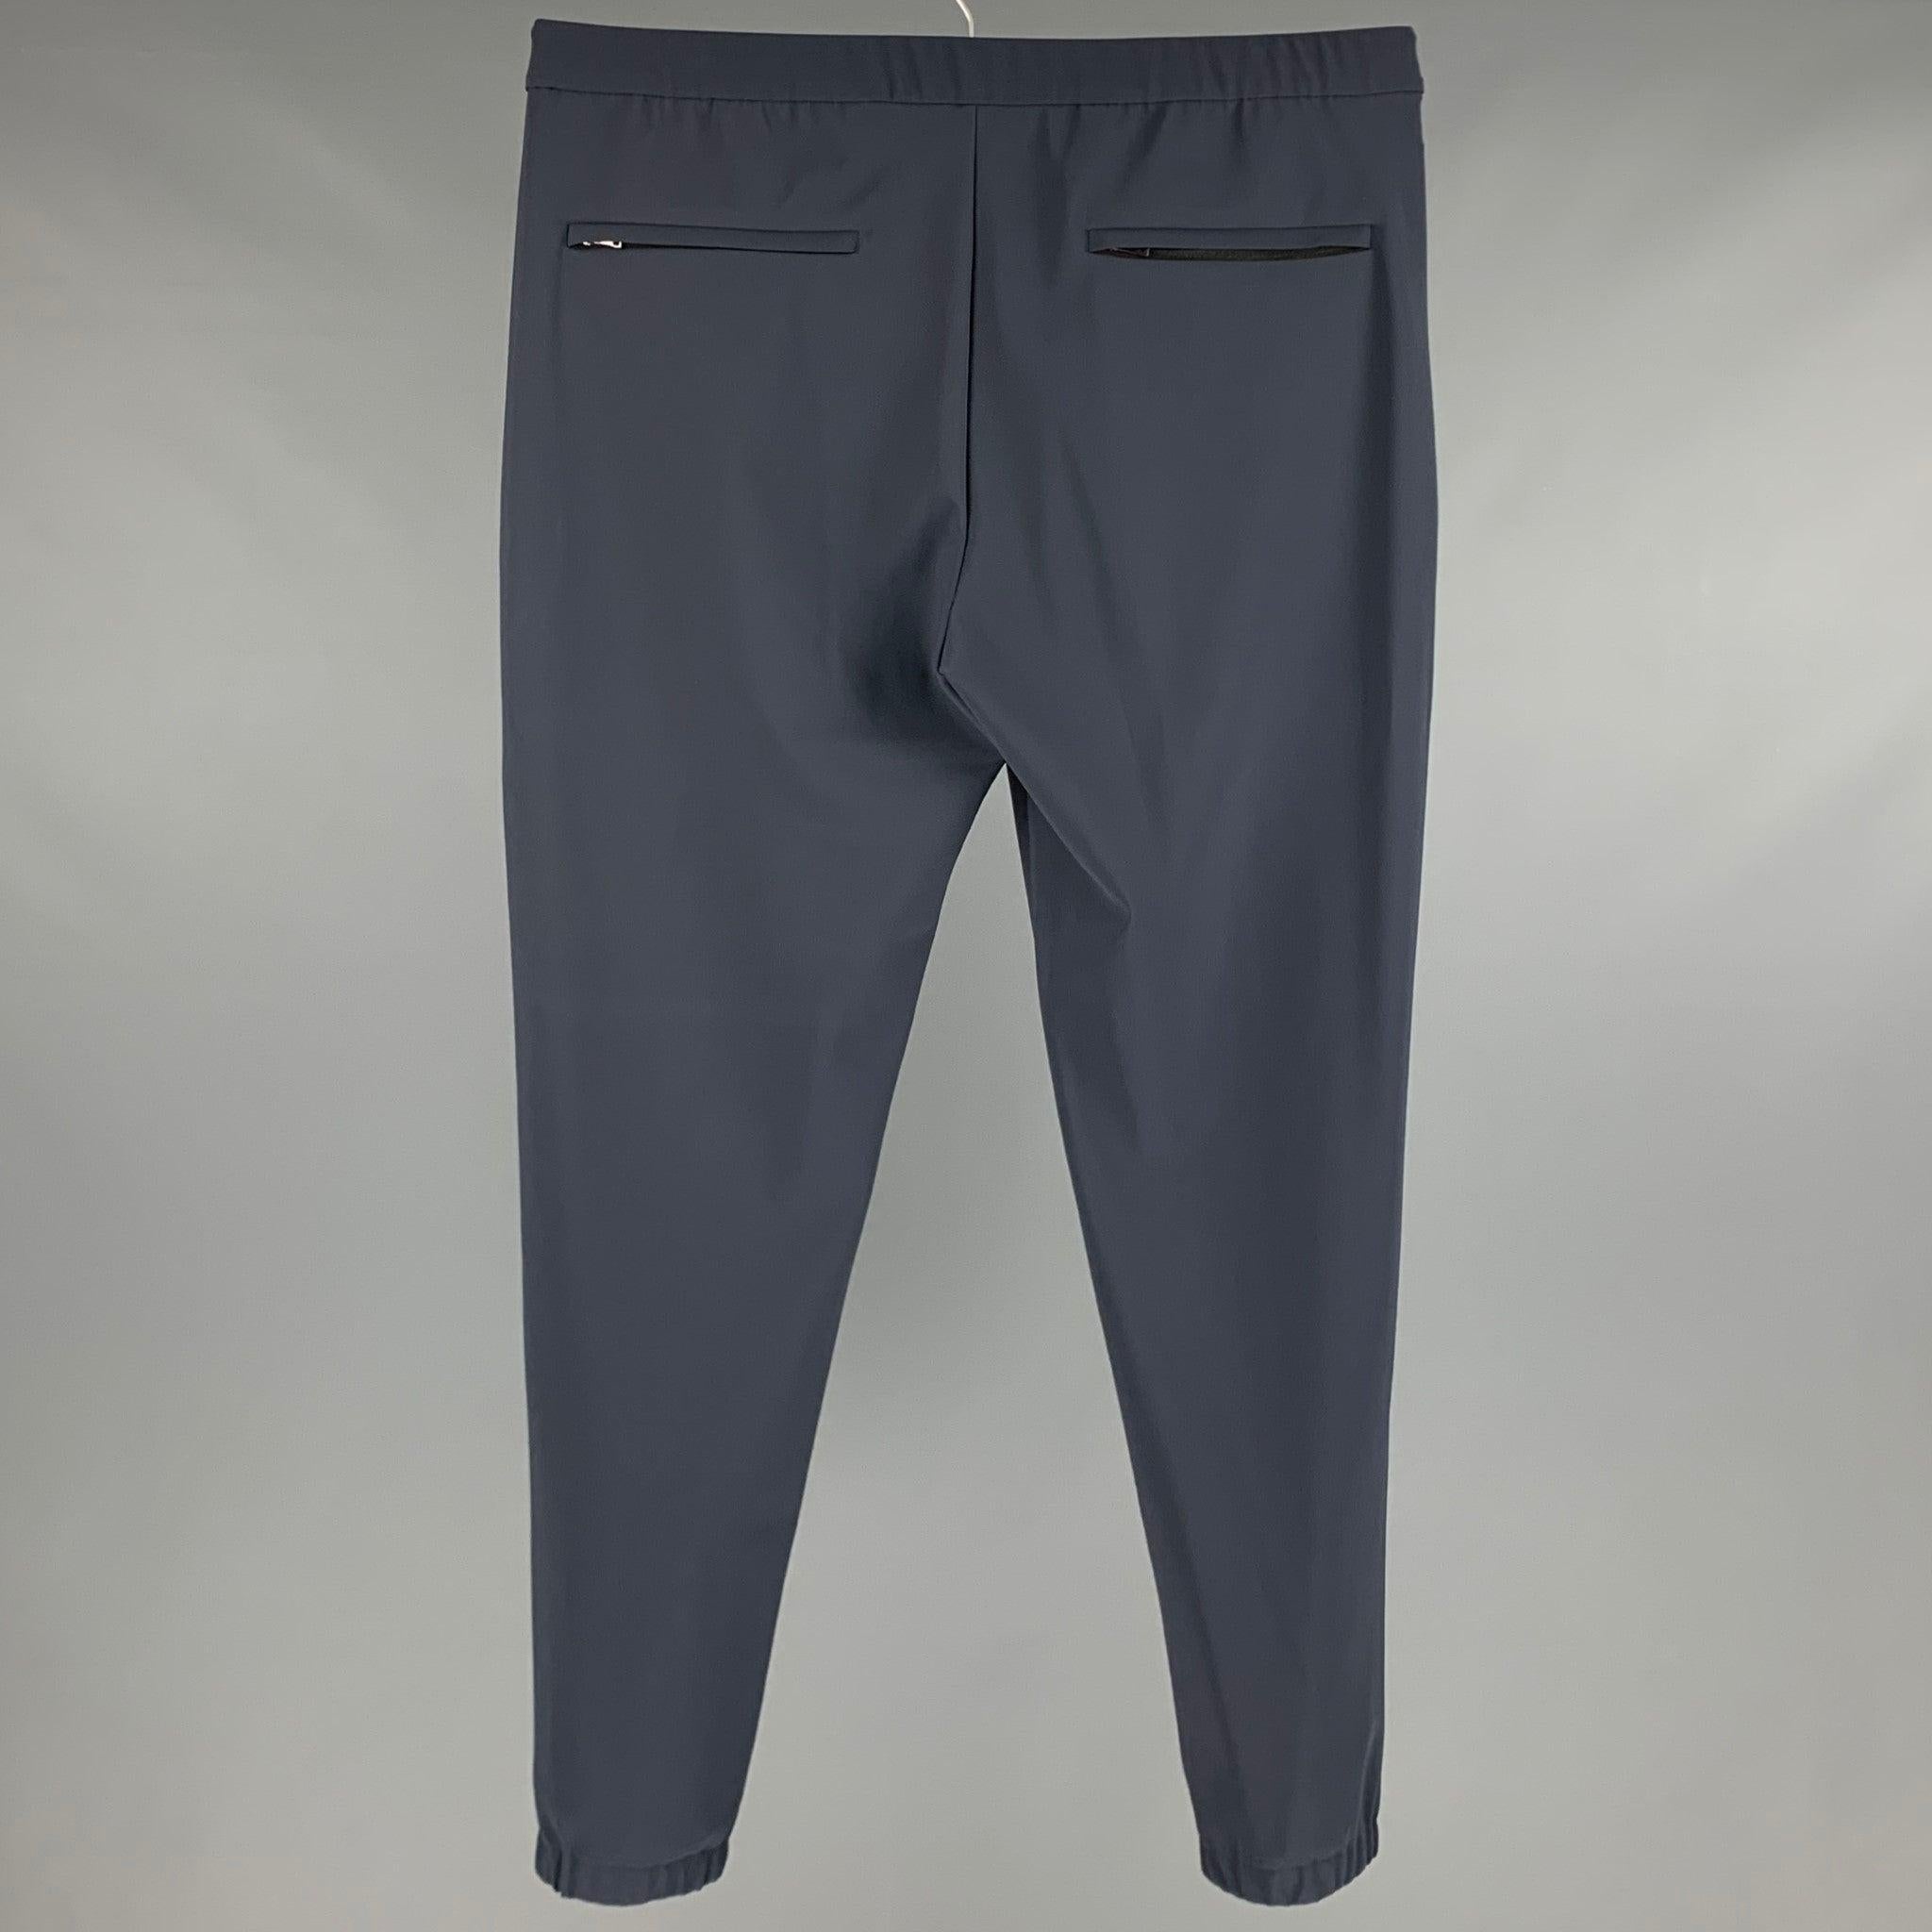 THEORY casual pants
in a slate grey polyamide blend fabric featuring joggers style, drawstring waist, zipper pockets, and zip fly closure.Excellent Pre-Owned Condition. 

Marked:   L 

Measurements: 
  Waist: 35 inches Rise: 10.5 inches Inseam: 30